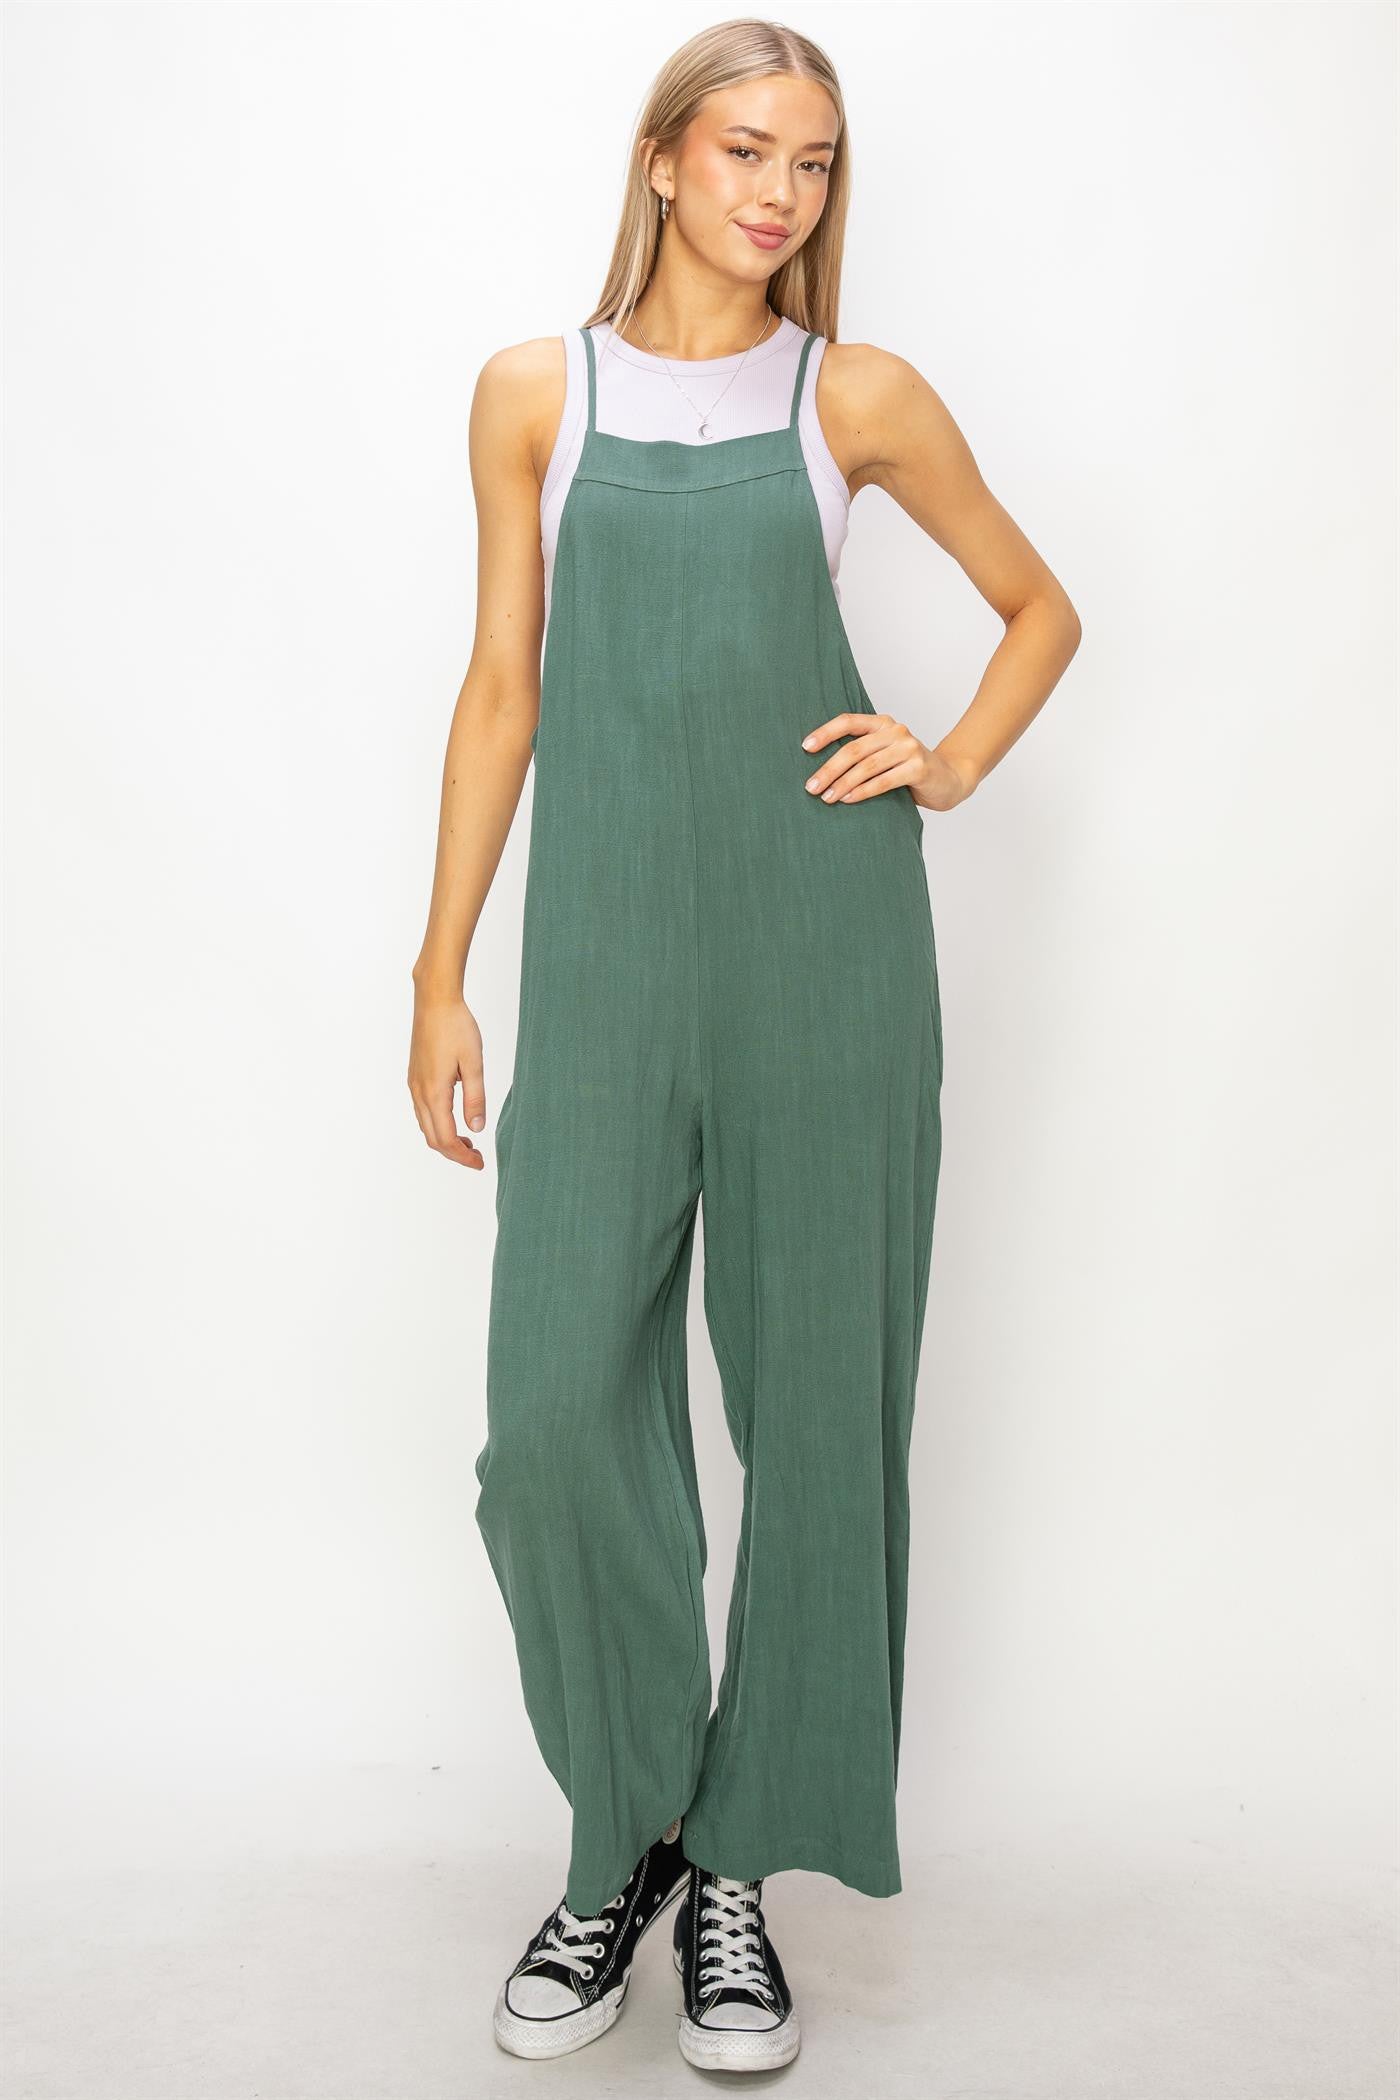 The Shelby Jumpsuit